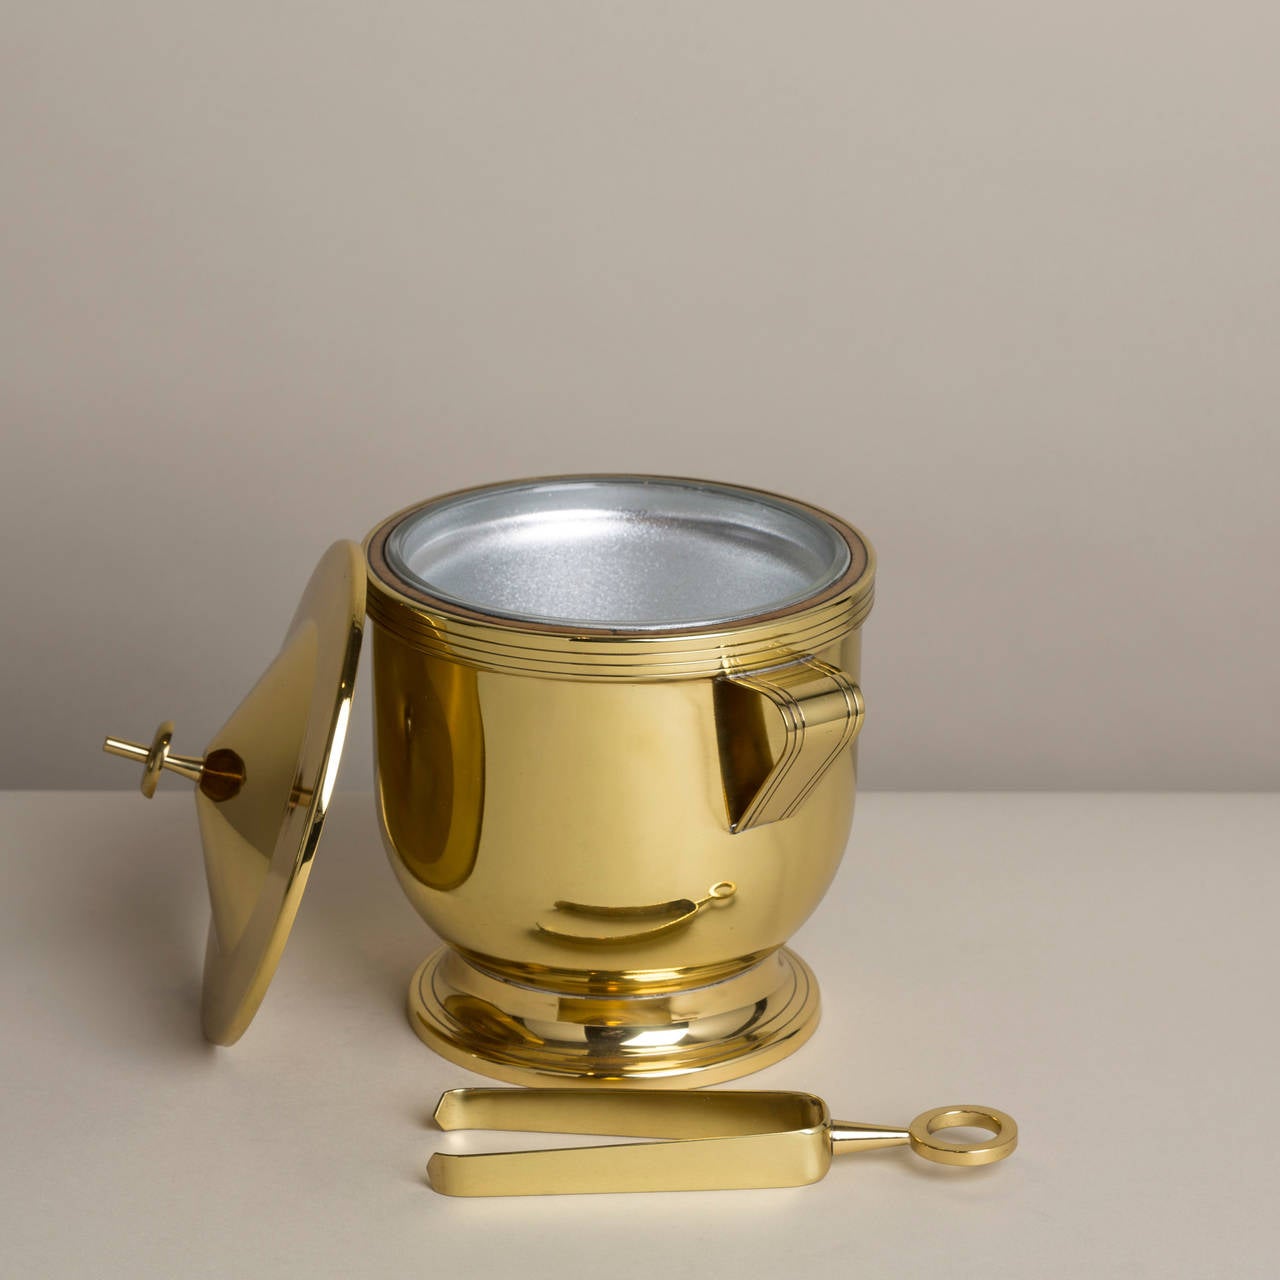 American A Brass Ice Bucket and Tongs designed by Parzinger 1950s stamped